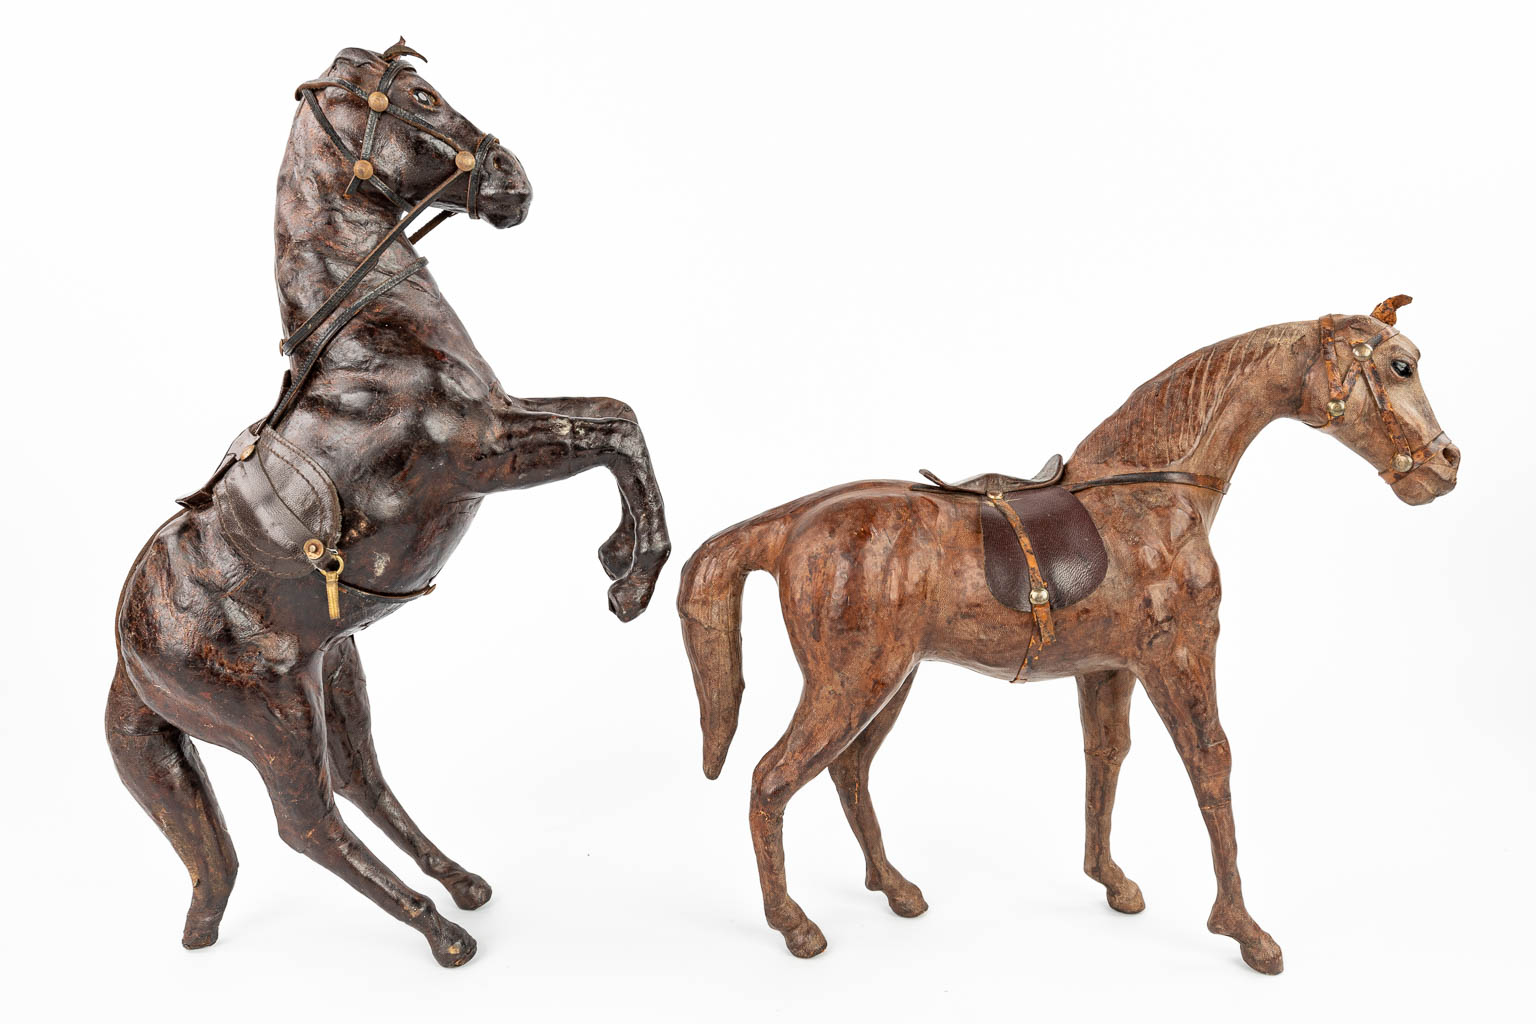 A collection of 15 horses made of Papier Maché and finished with leather. (H:30cm)